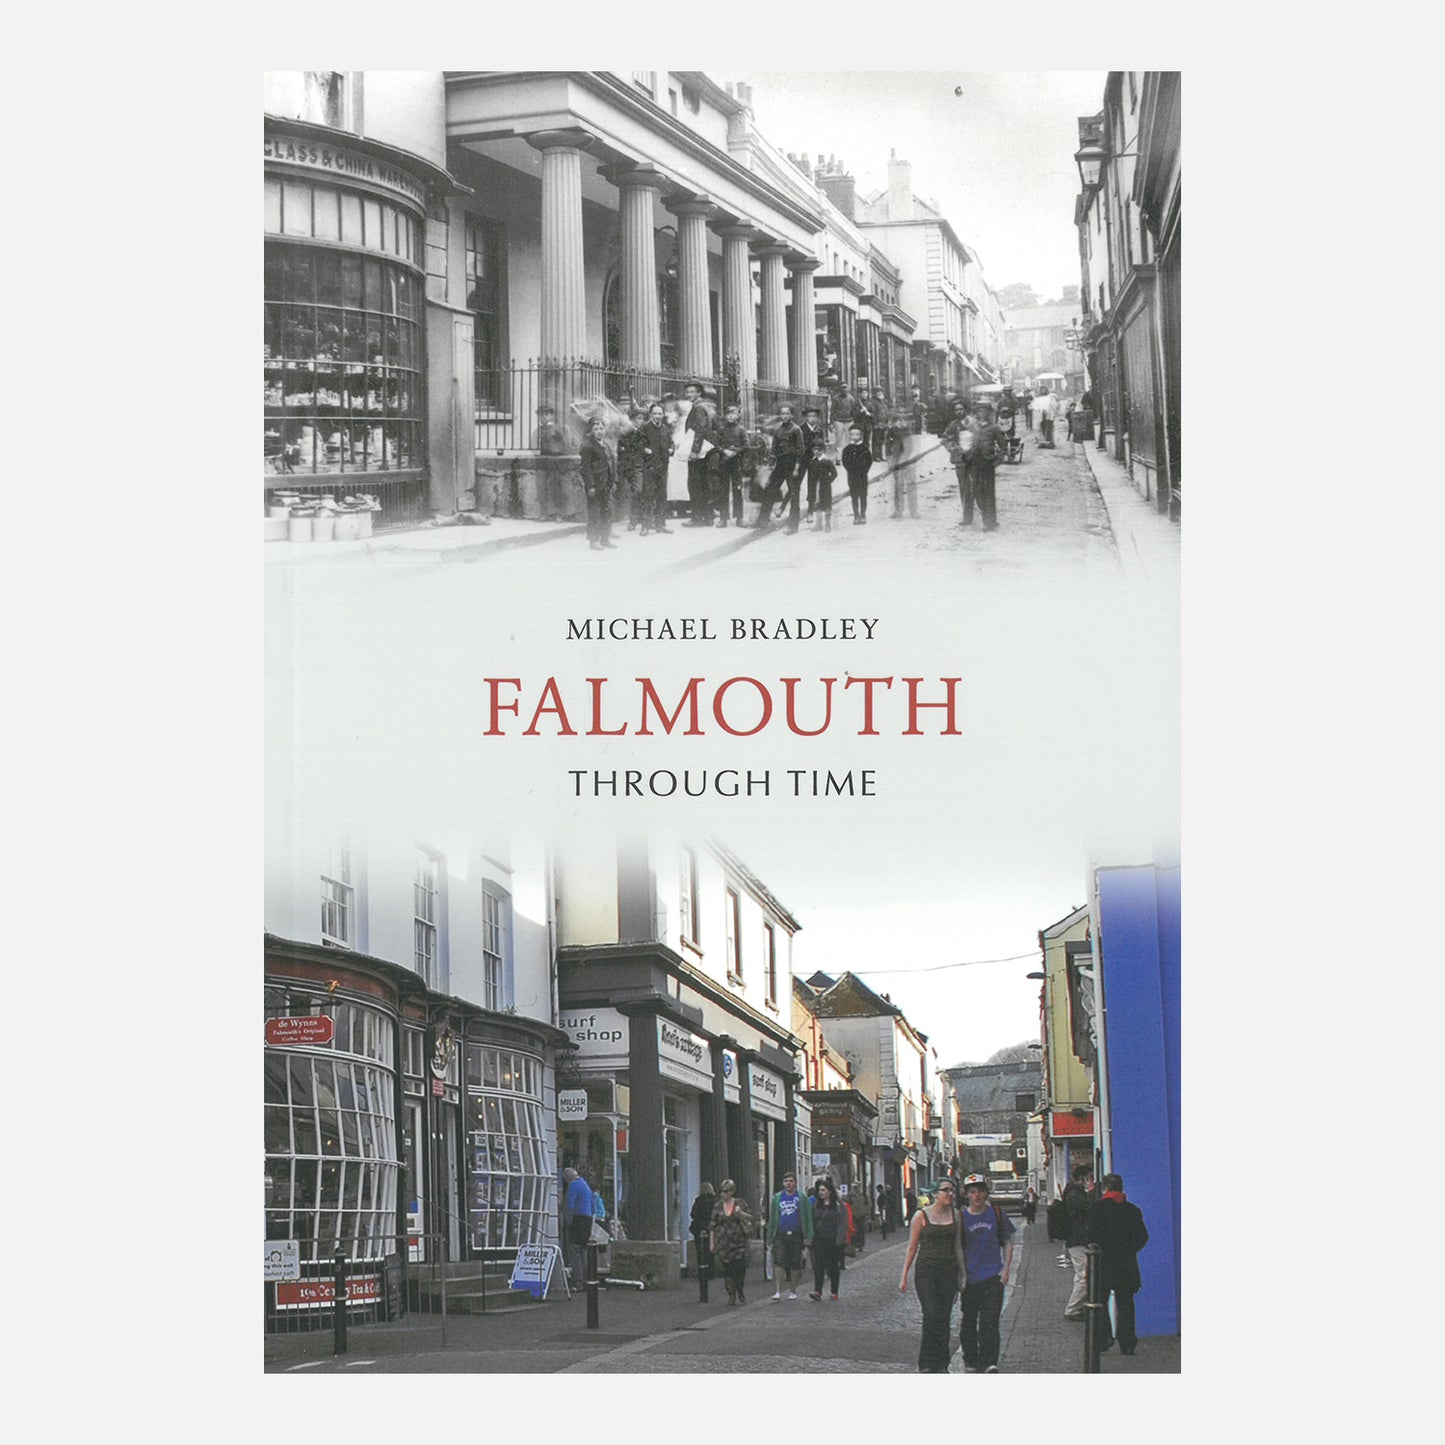 Falmouth Through Time by Michael Bradley. A recent image of Falmouth's iconic high street compared with a historical black and white image taken on the same spot.